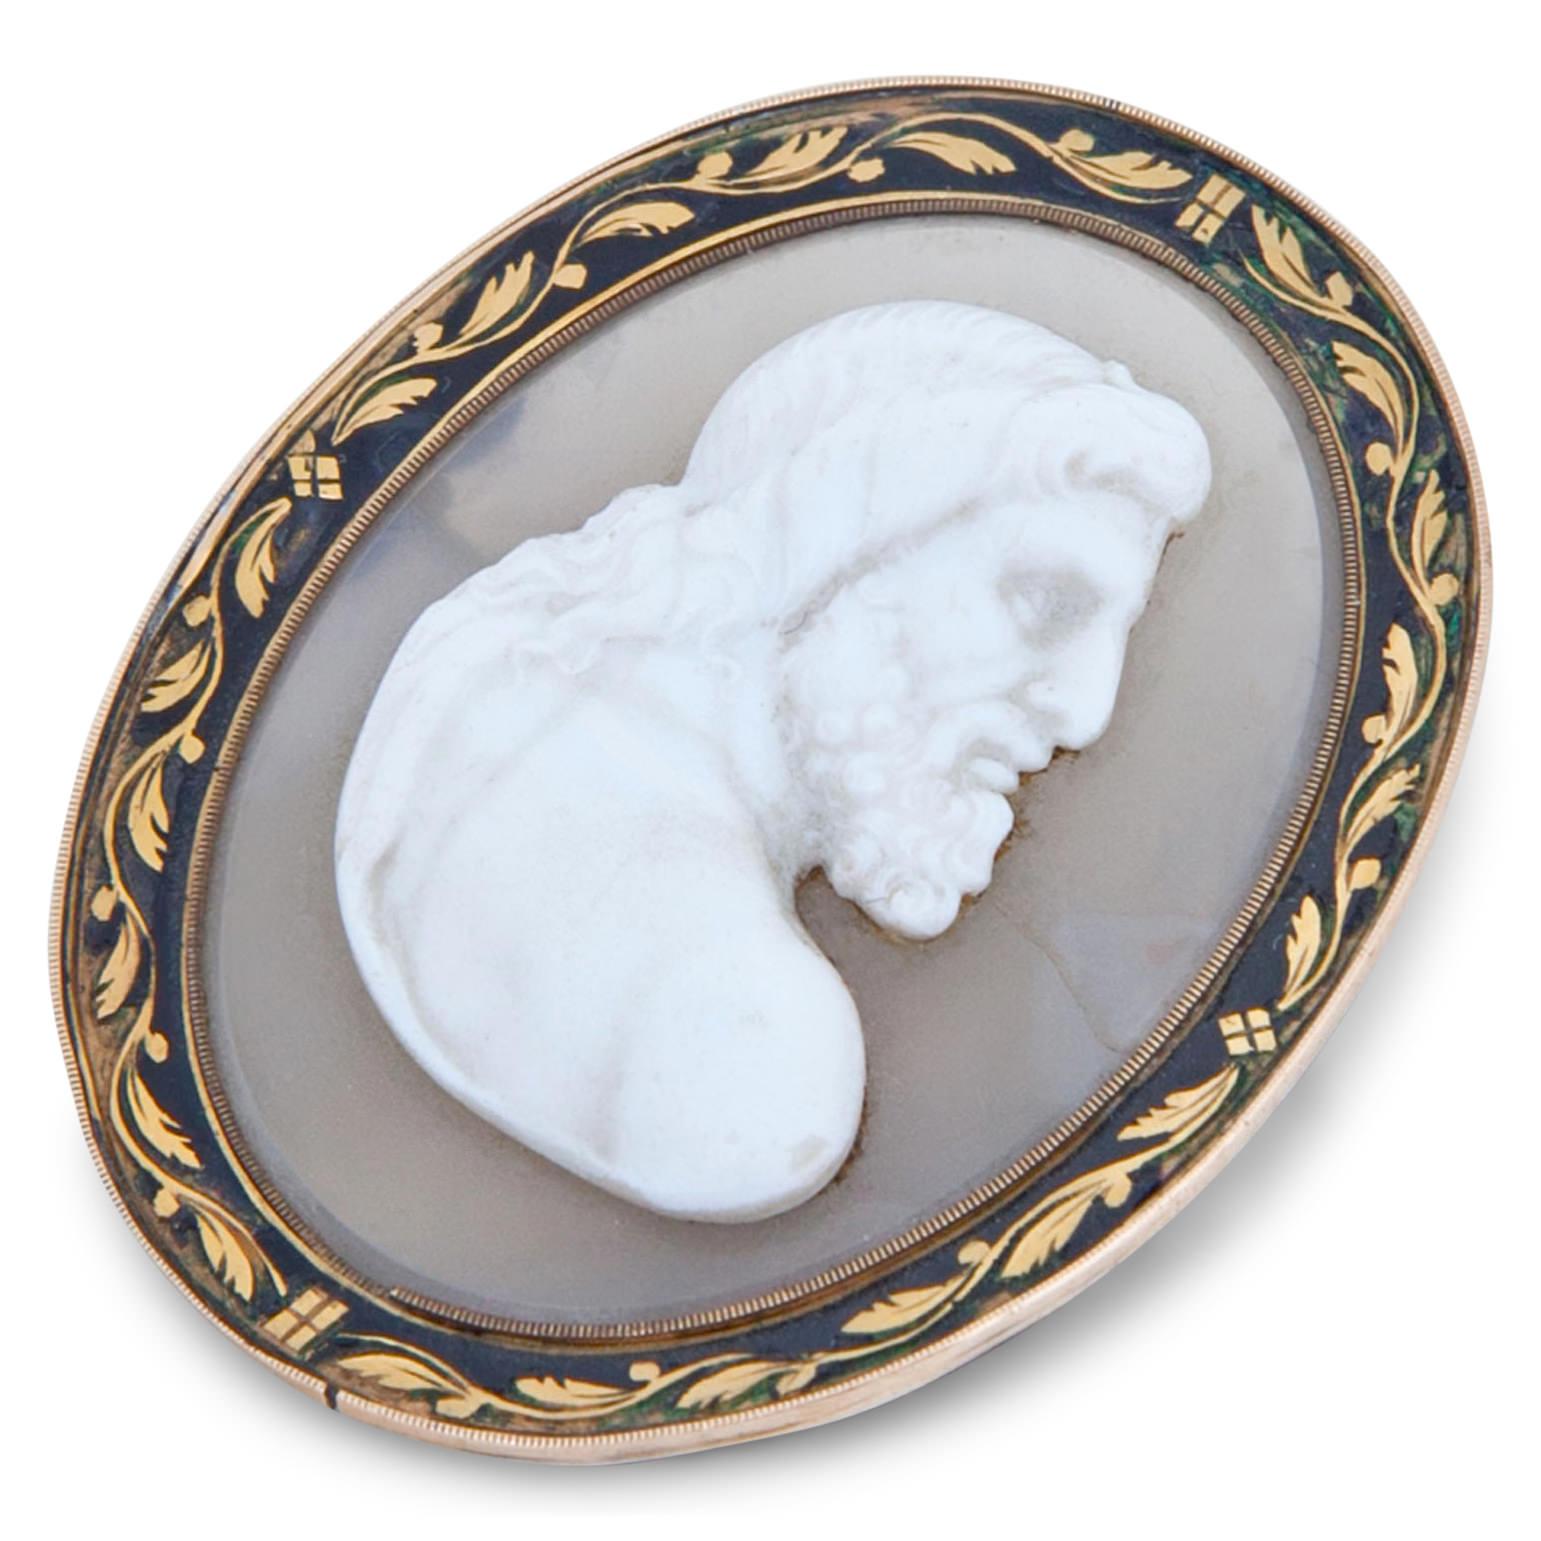 Small oval cameo broche in a gold frame out of Agate, depicting the profile of a bearded god. The brooch is fastened with a needle.